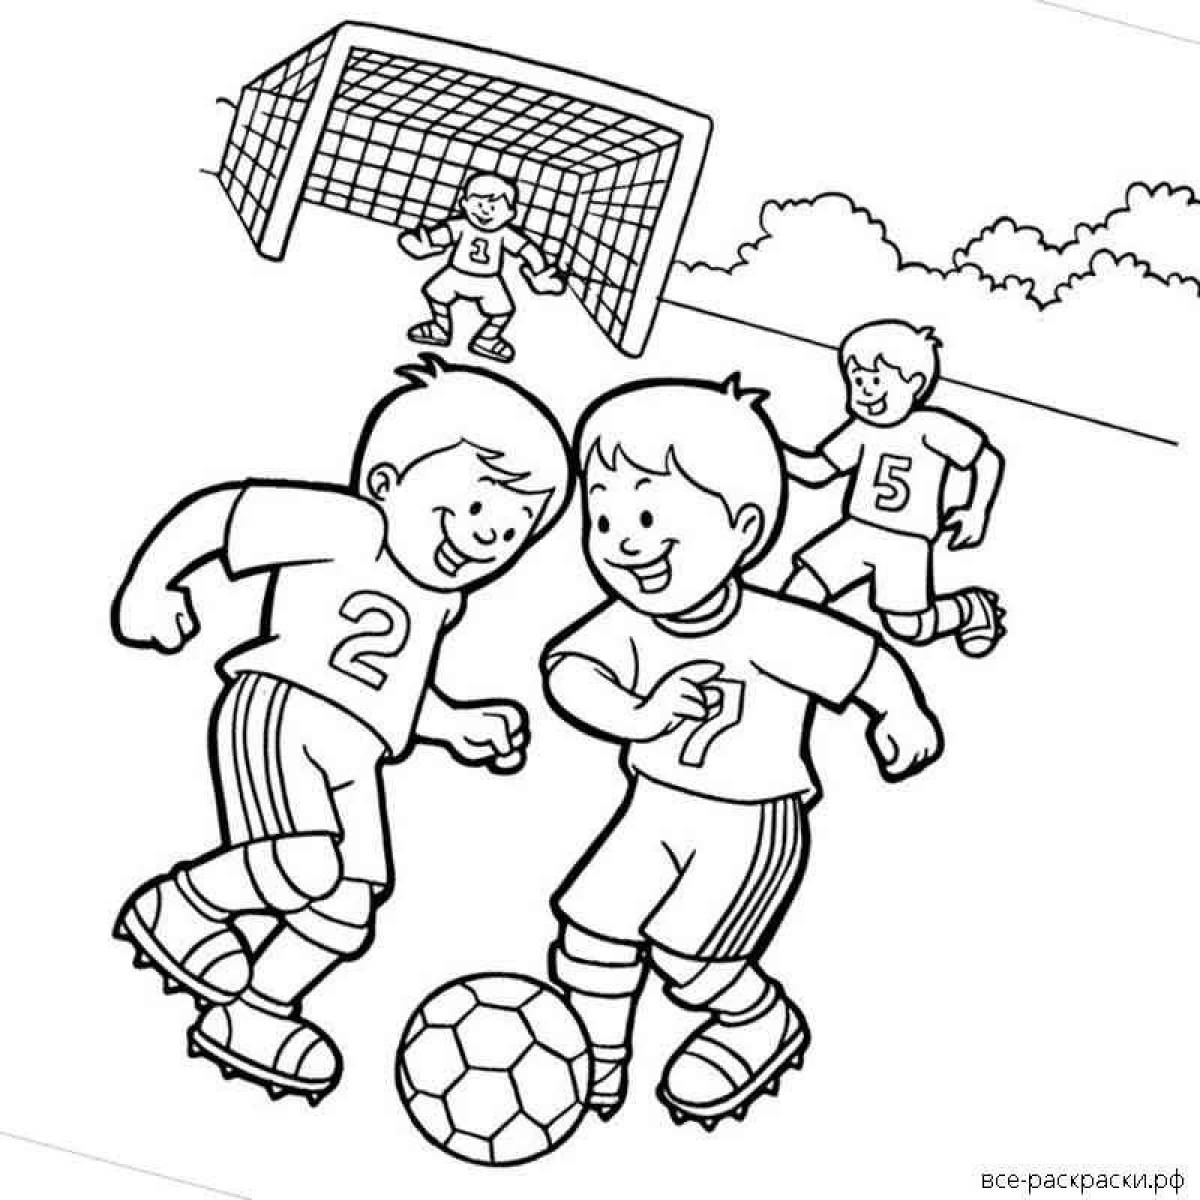 Comic football coloring book for kids